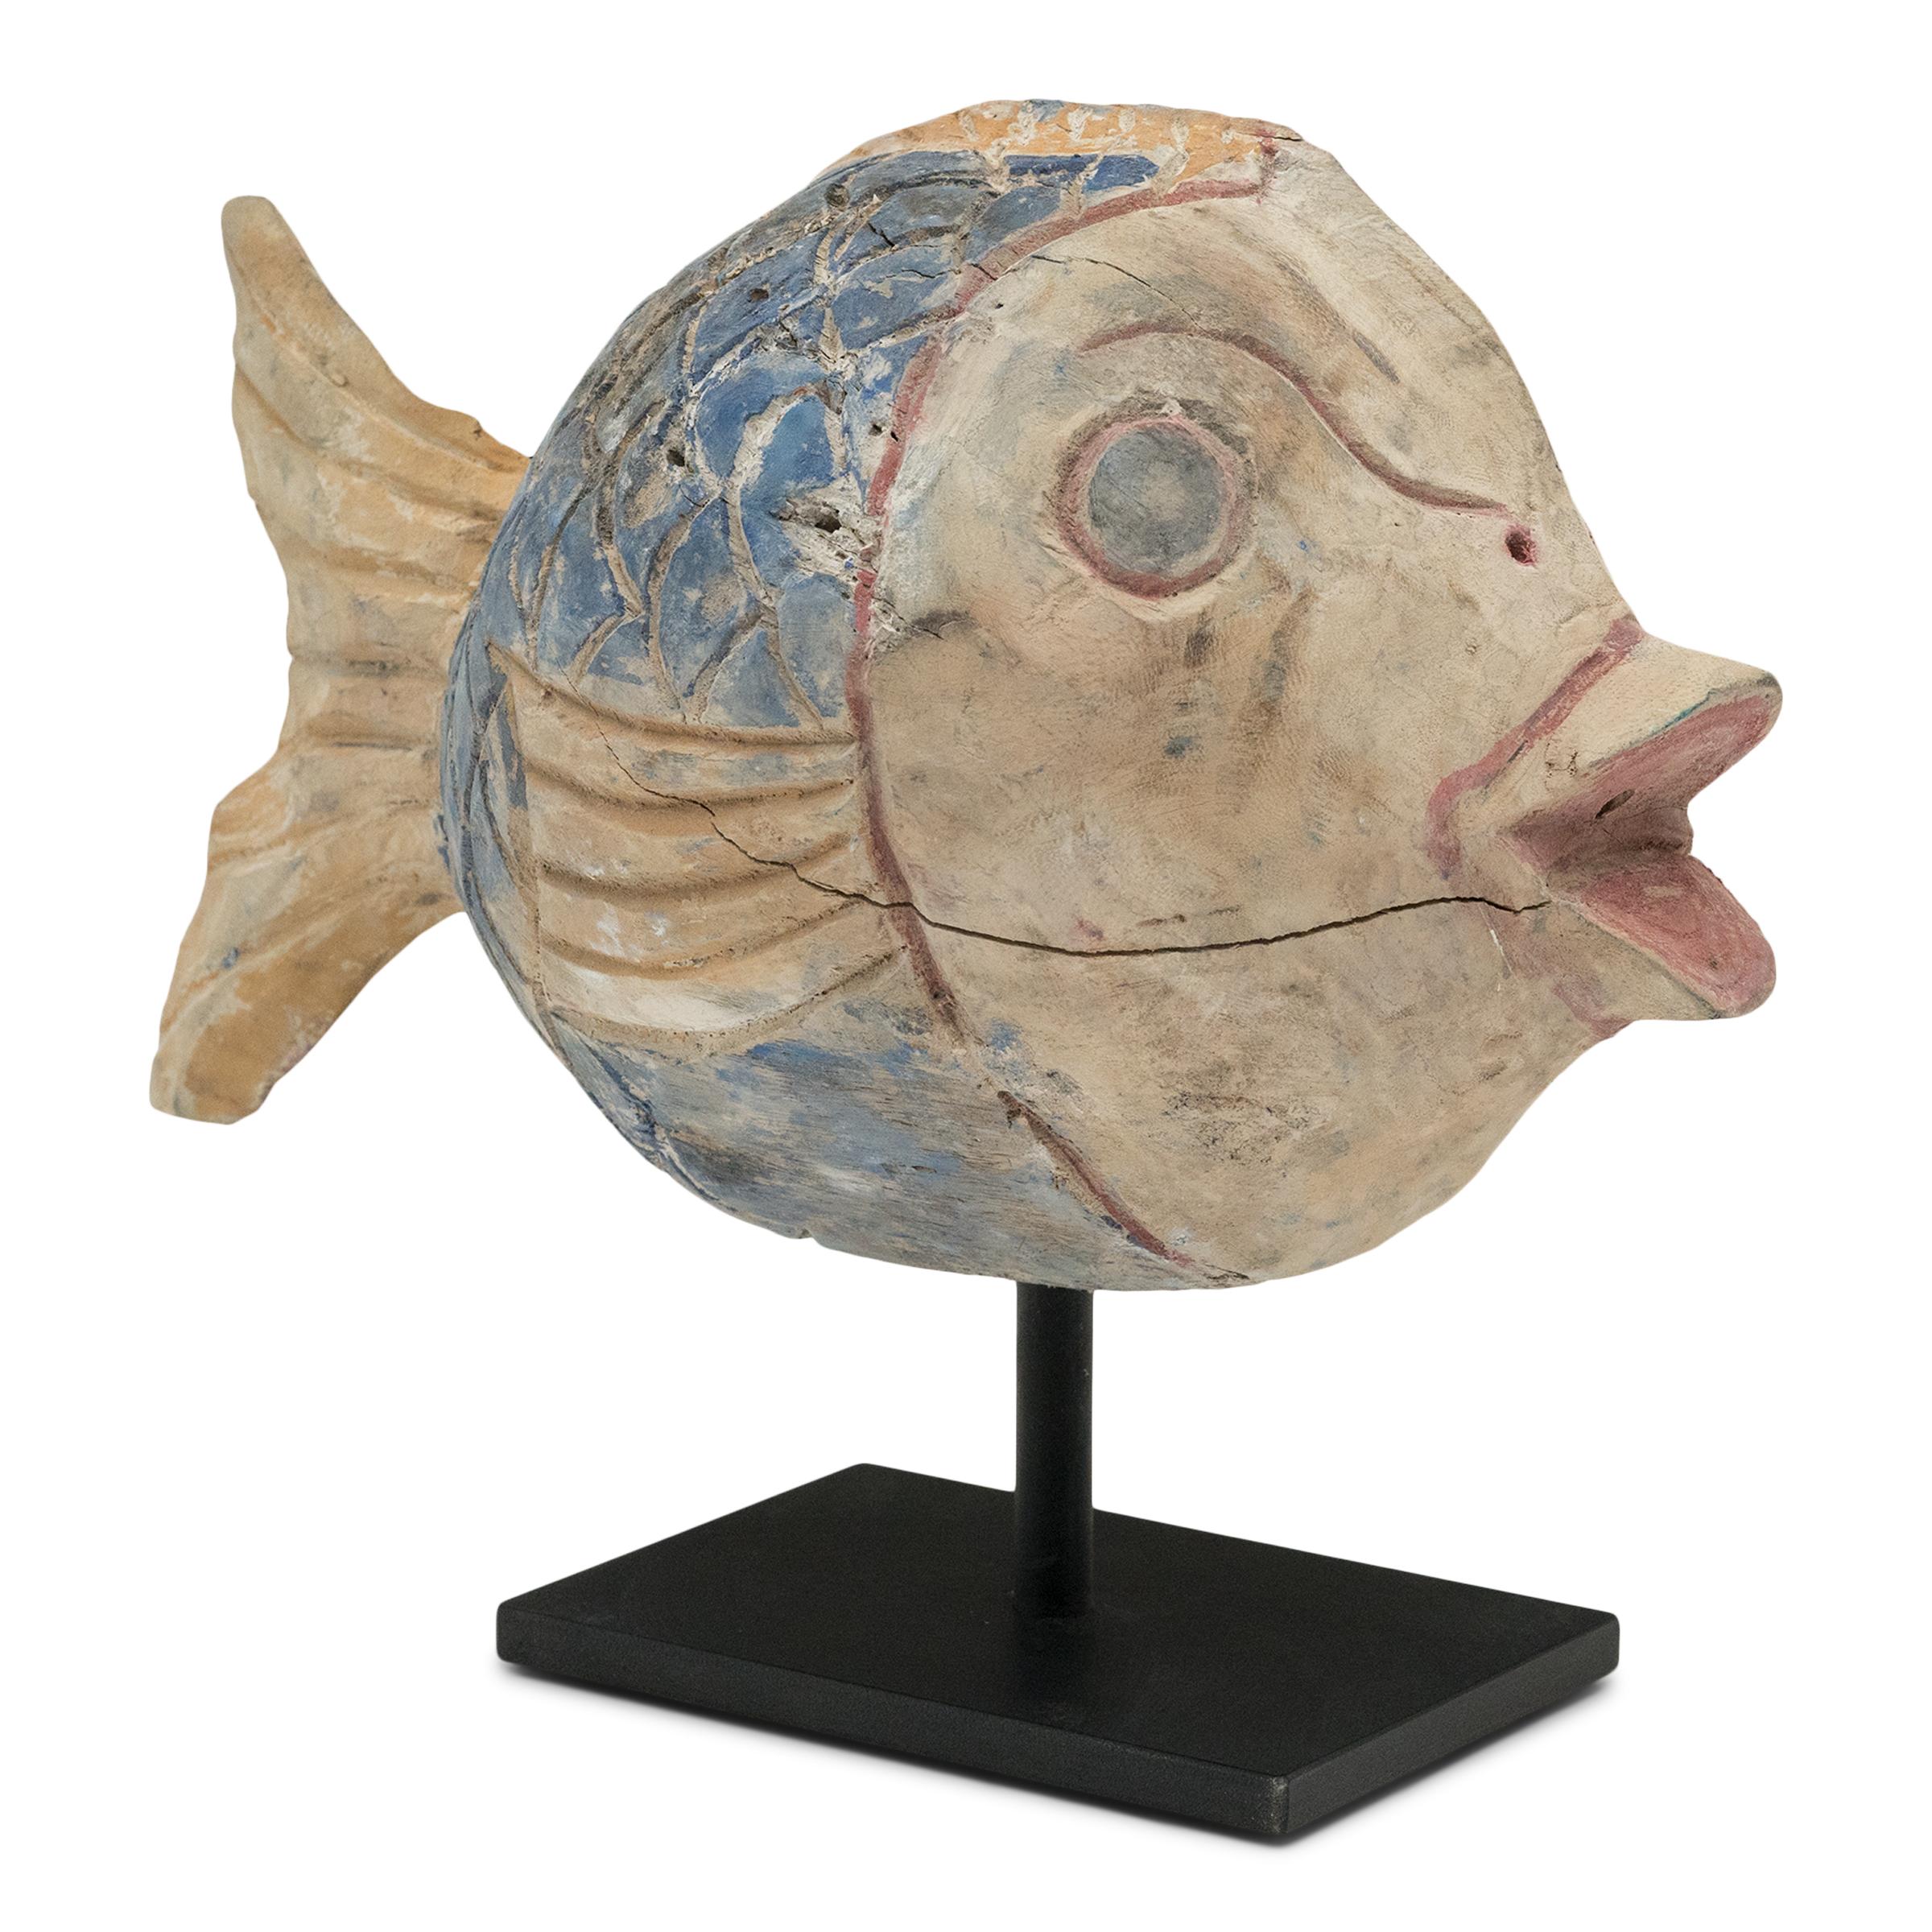 Hand-crafted from reclaimed wood, this large koi sculpture is a traditional symbol of harmony and luck. For Buddhists, such a fish represents a freedom from all restraints. Much of the popularity of fish as a decorative theme hinges on the fact that